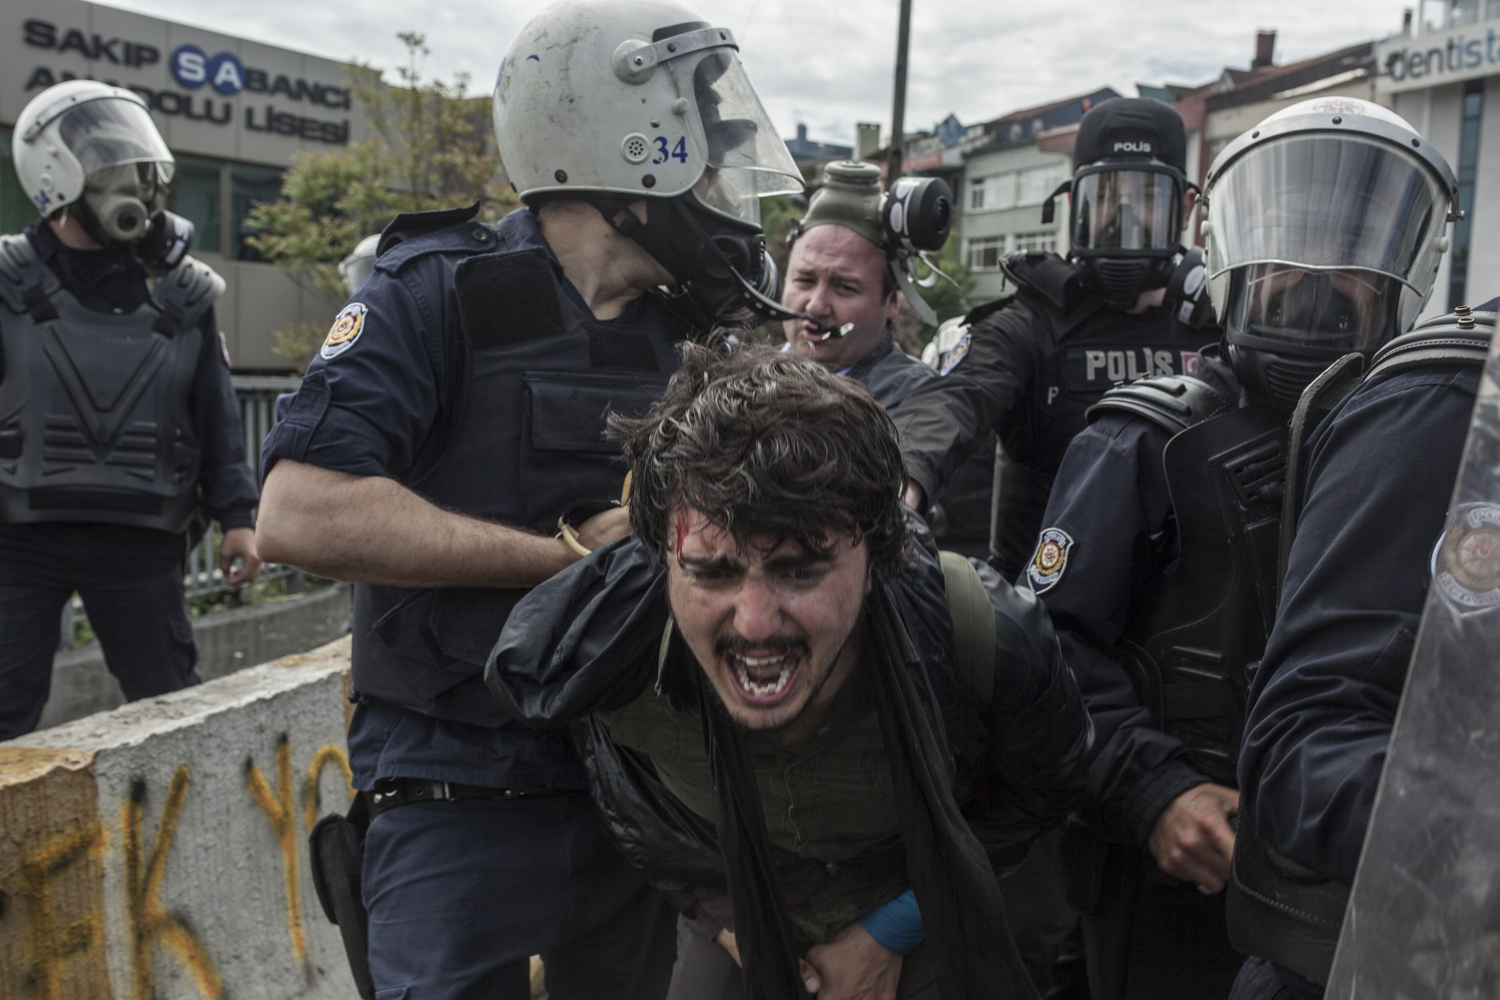 Istanbul May A protester is being taken into custody during the protest in Istanbul, May 1, 2014. -